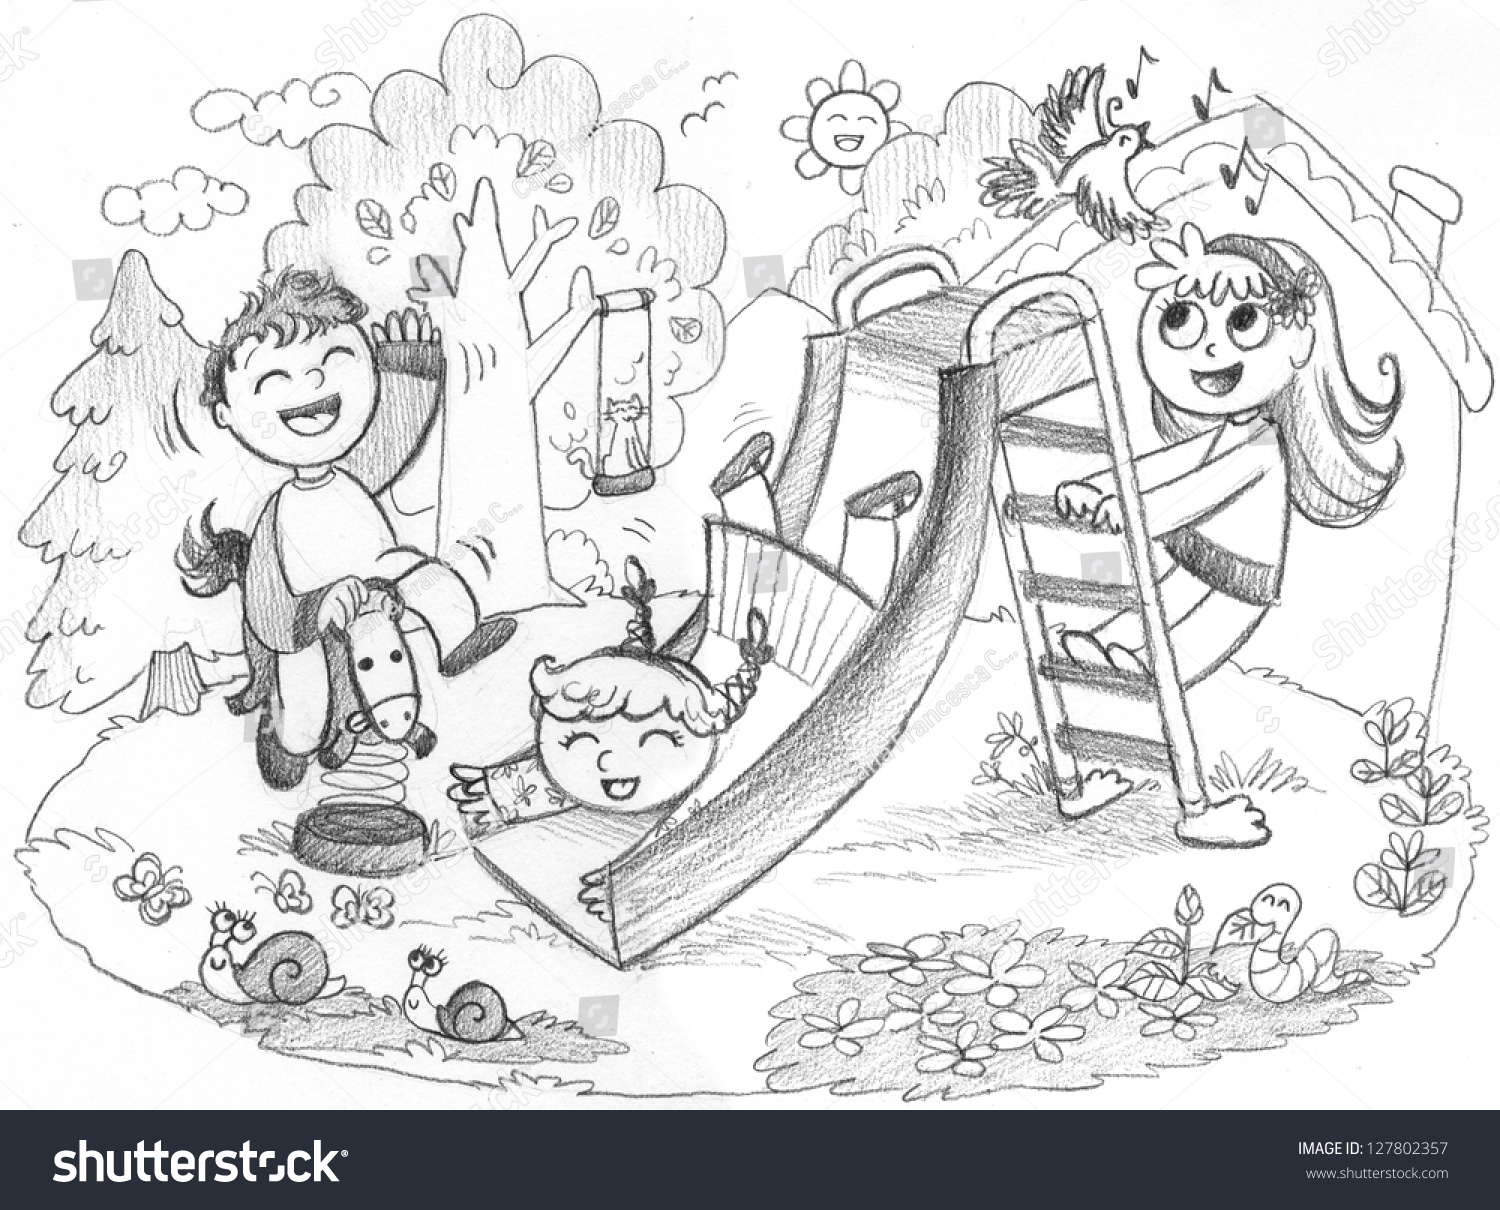 Kids playing in the playground clipart black and white